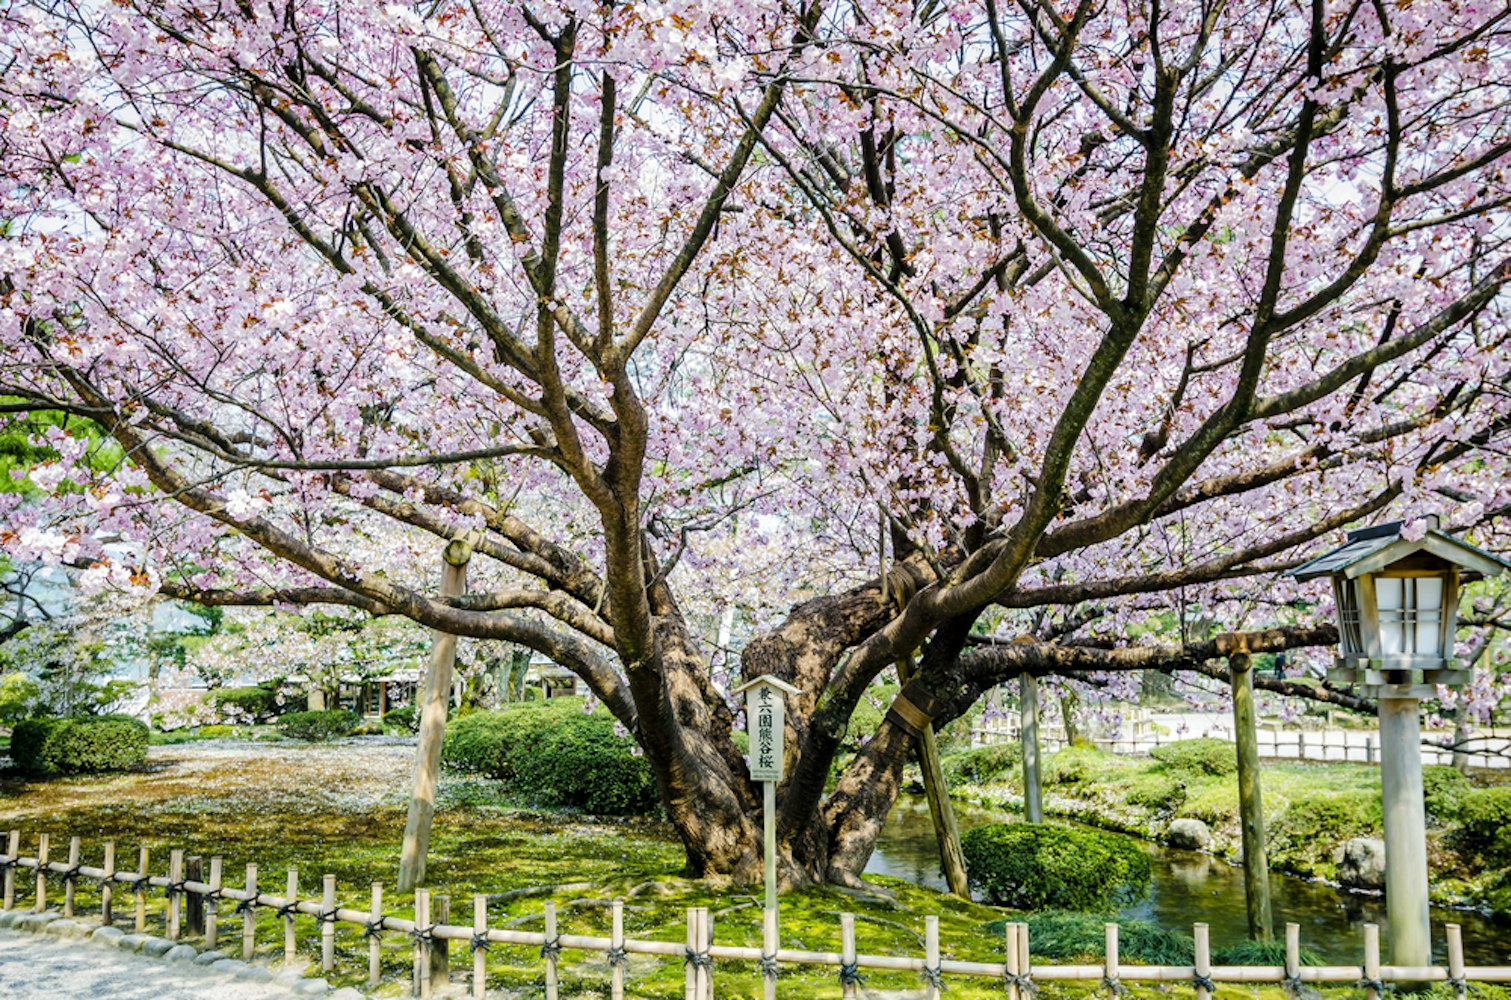 The Beauty of Cherry Blossoms and Cherry Trees